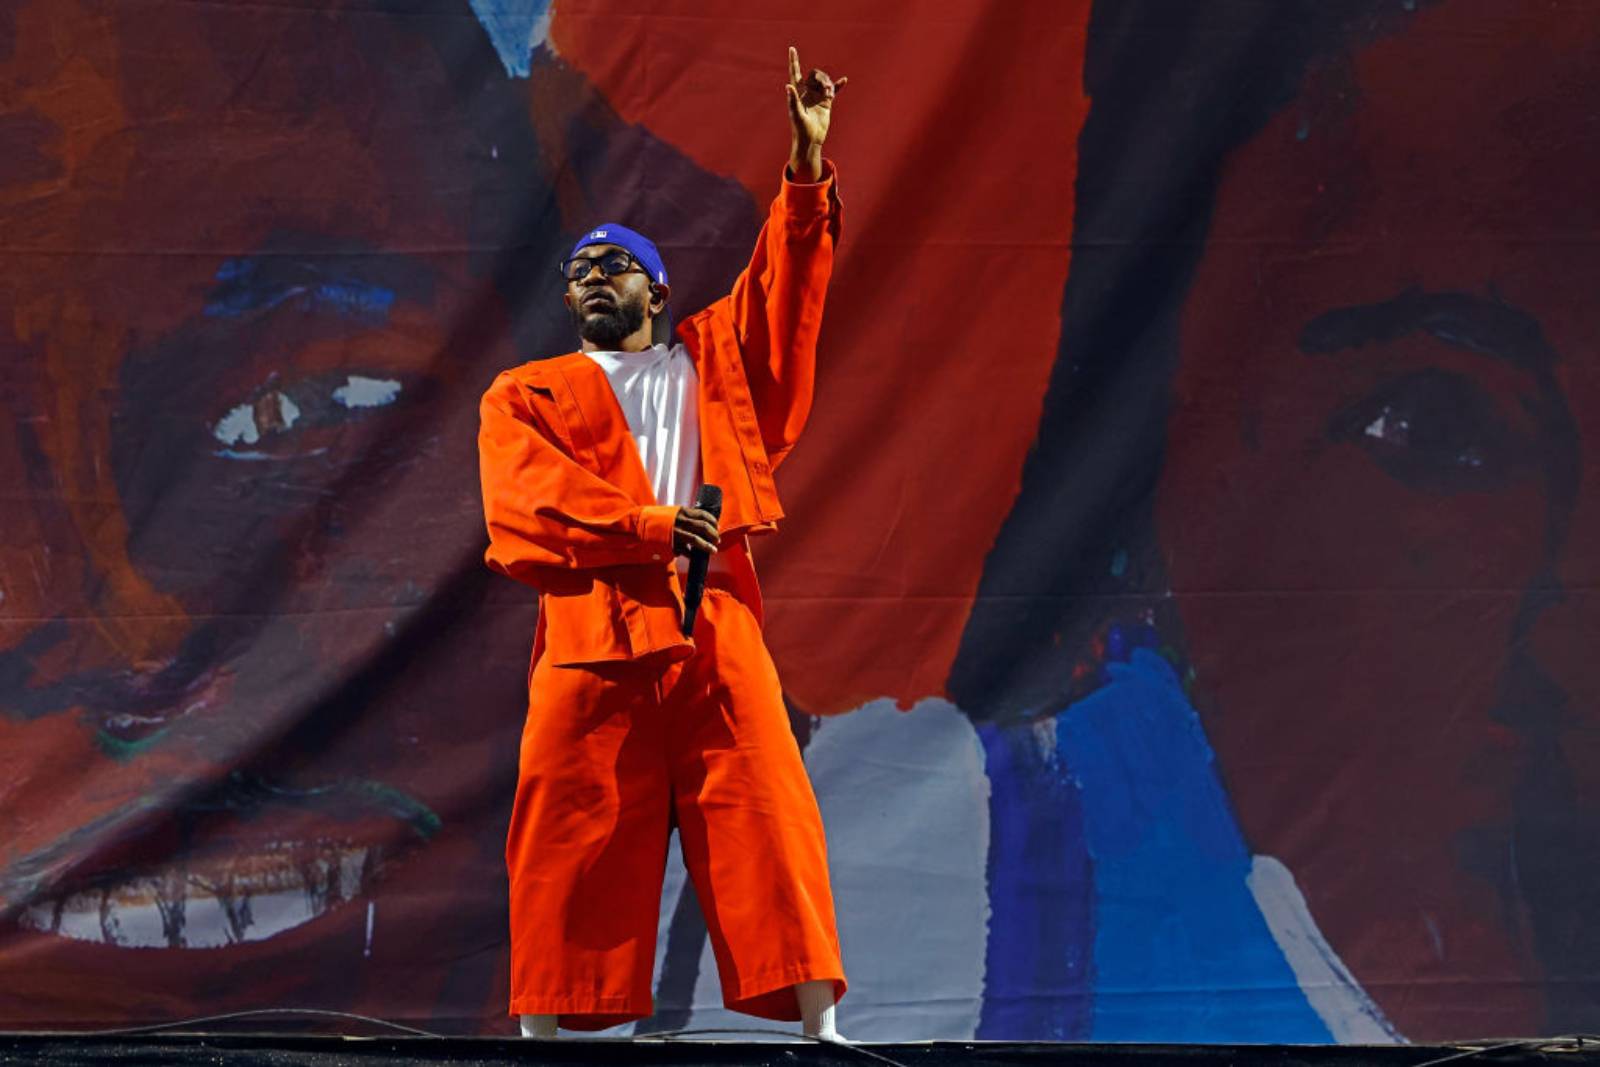 Kendrick Lamar performs during the 2023 Governors Ball Music Festival at Flushing Meadows Corona Park on June 11, 2023 in New York City. (Photo by Taylor Hill/WireImage)